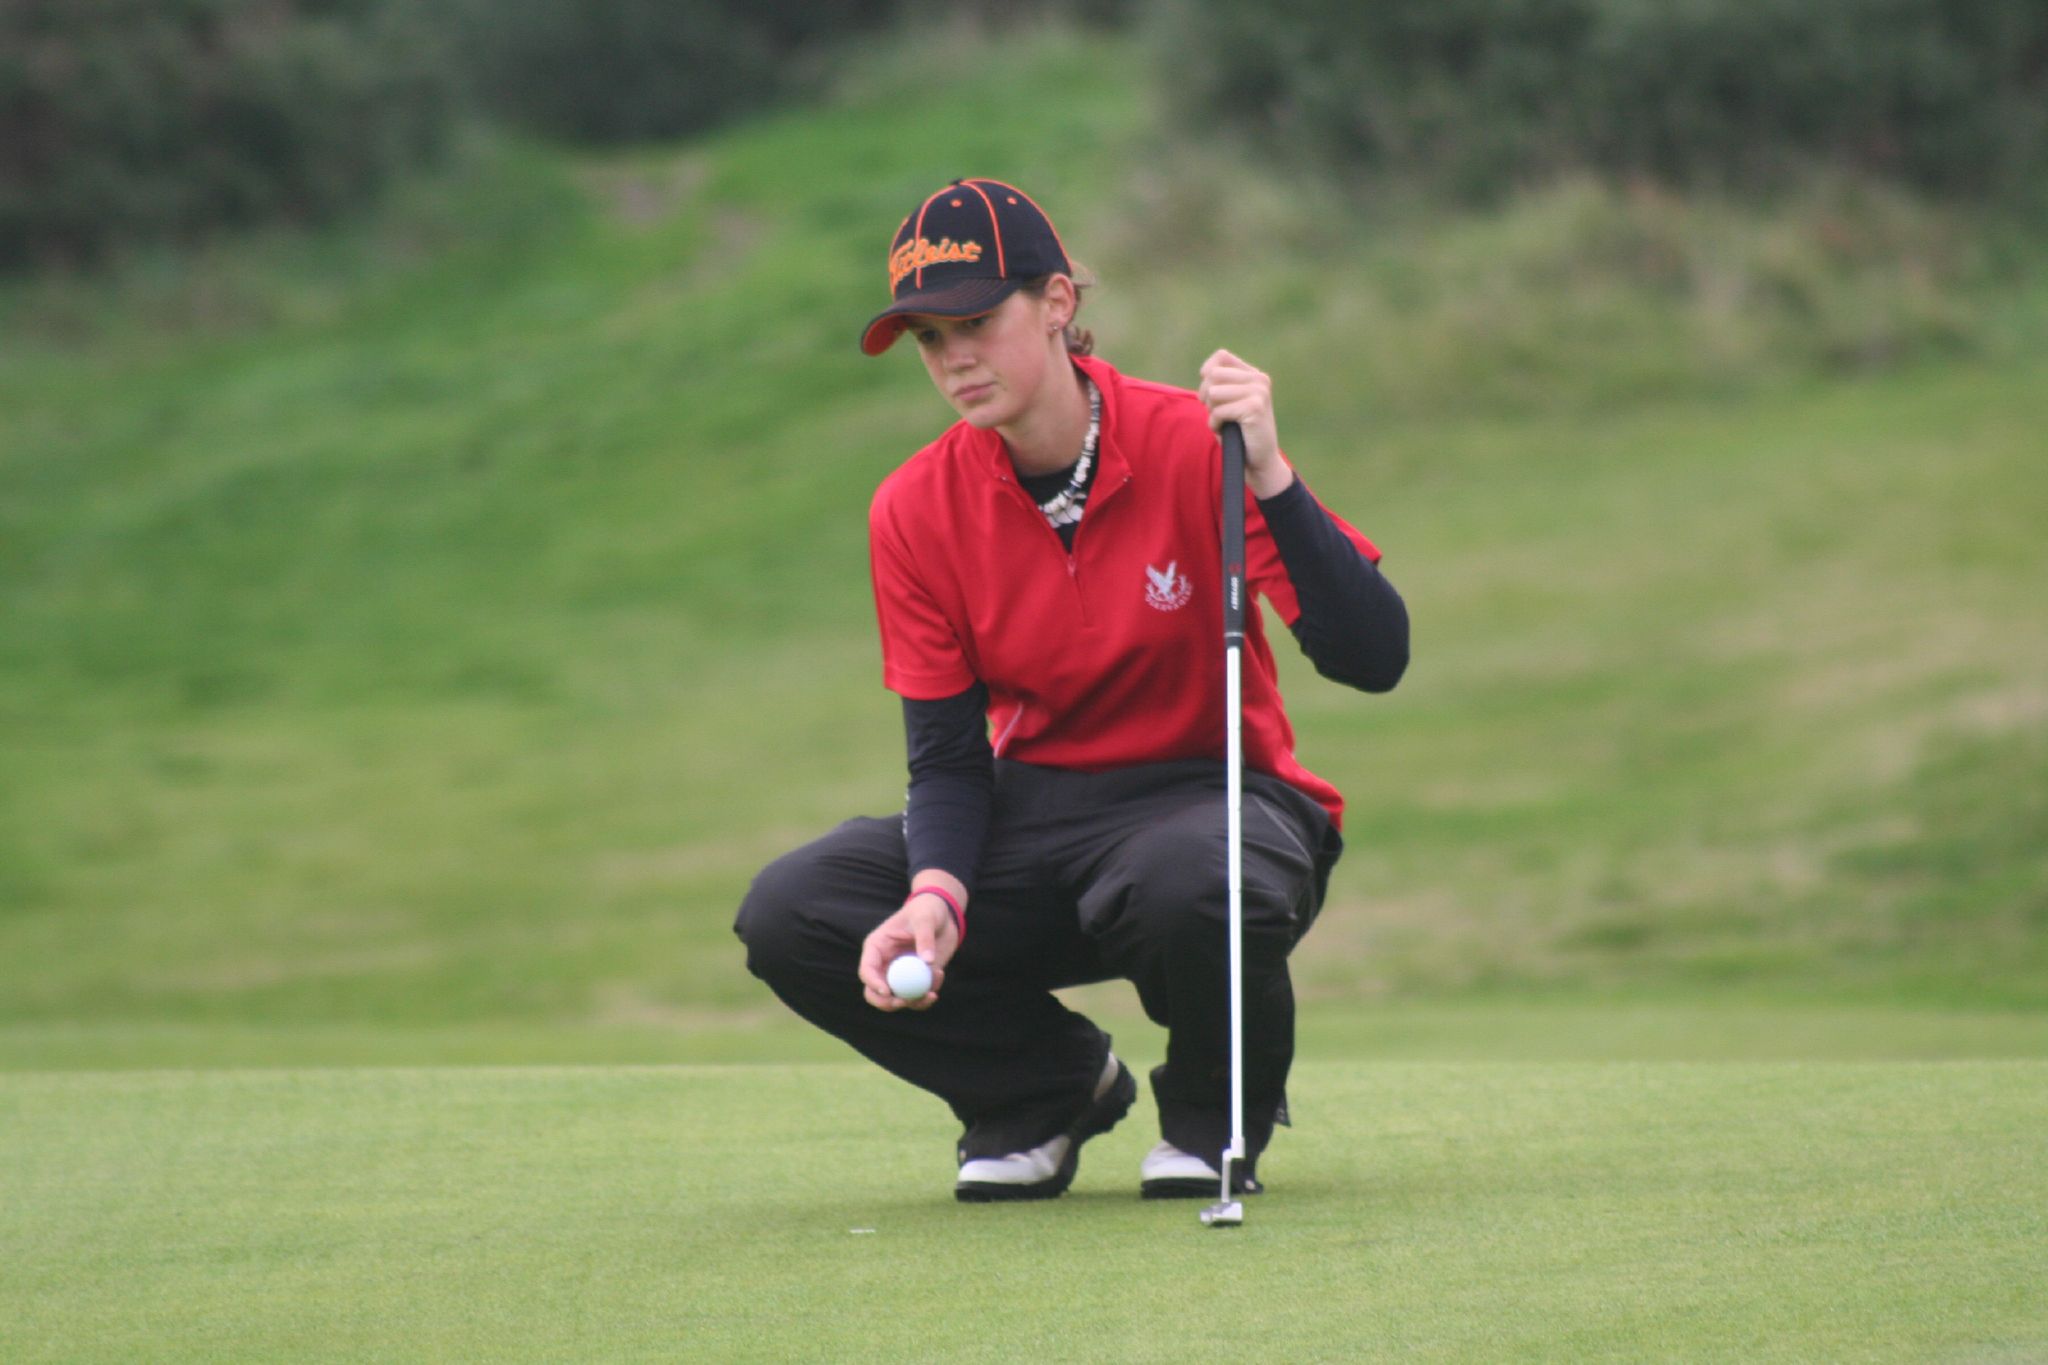 a golf player squats down and places his putter's ball on the green